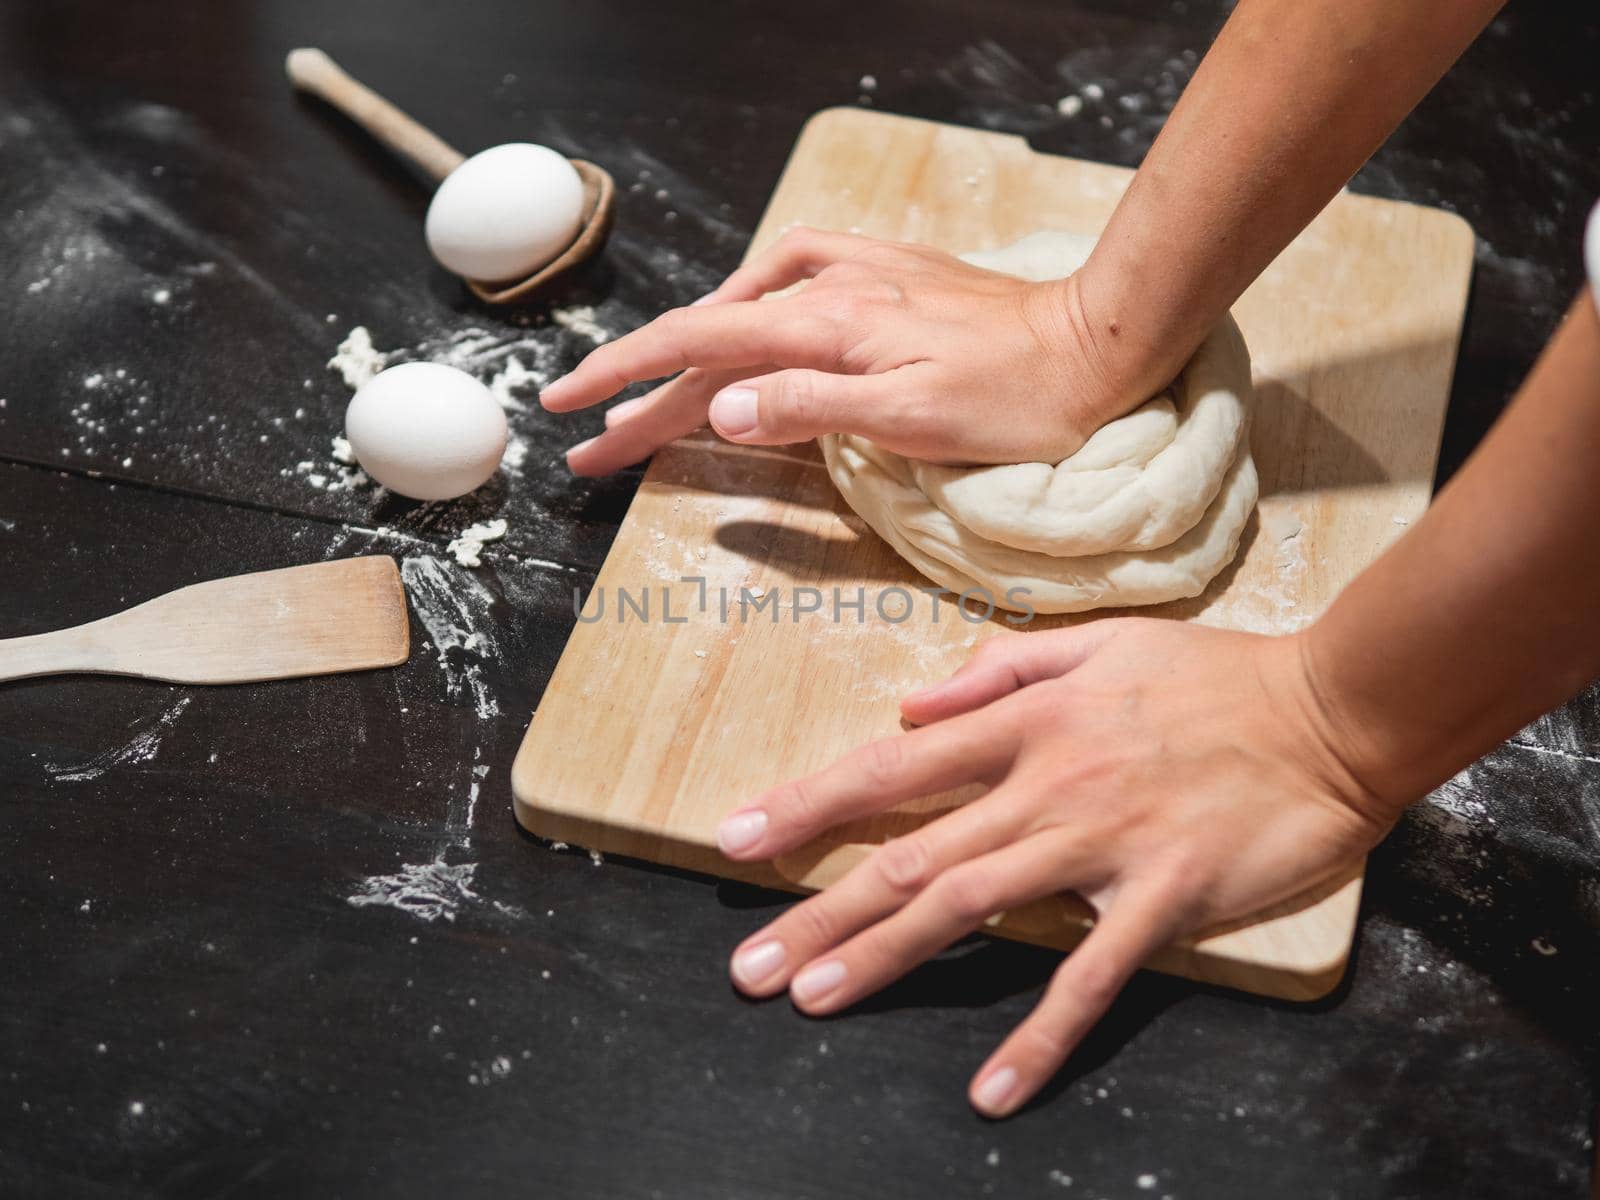 Woman kneads dough with flour and eggs on black wooden table. Cooking at home.